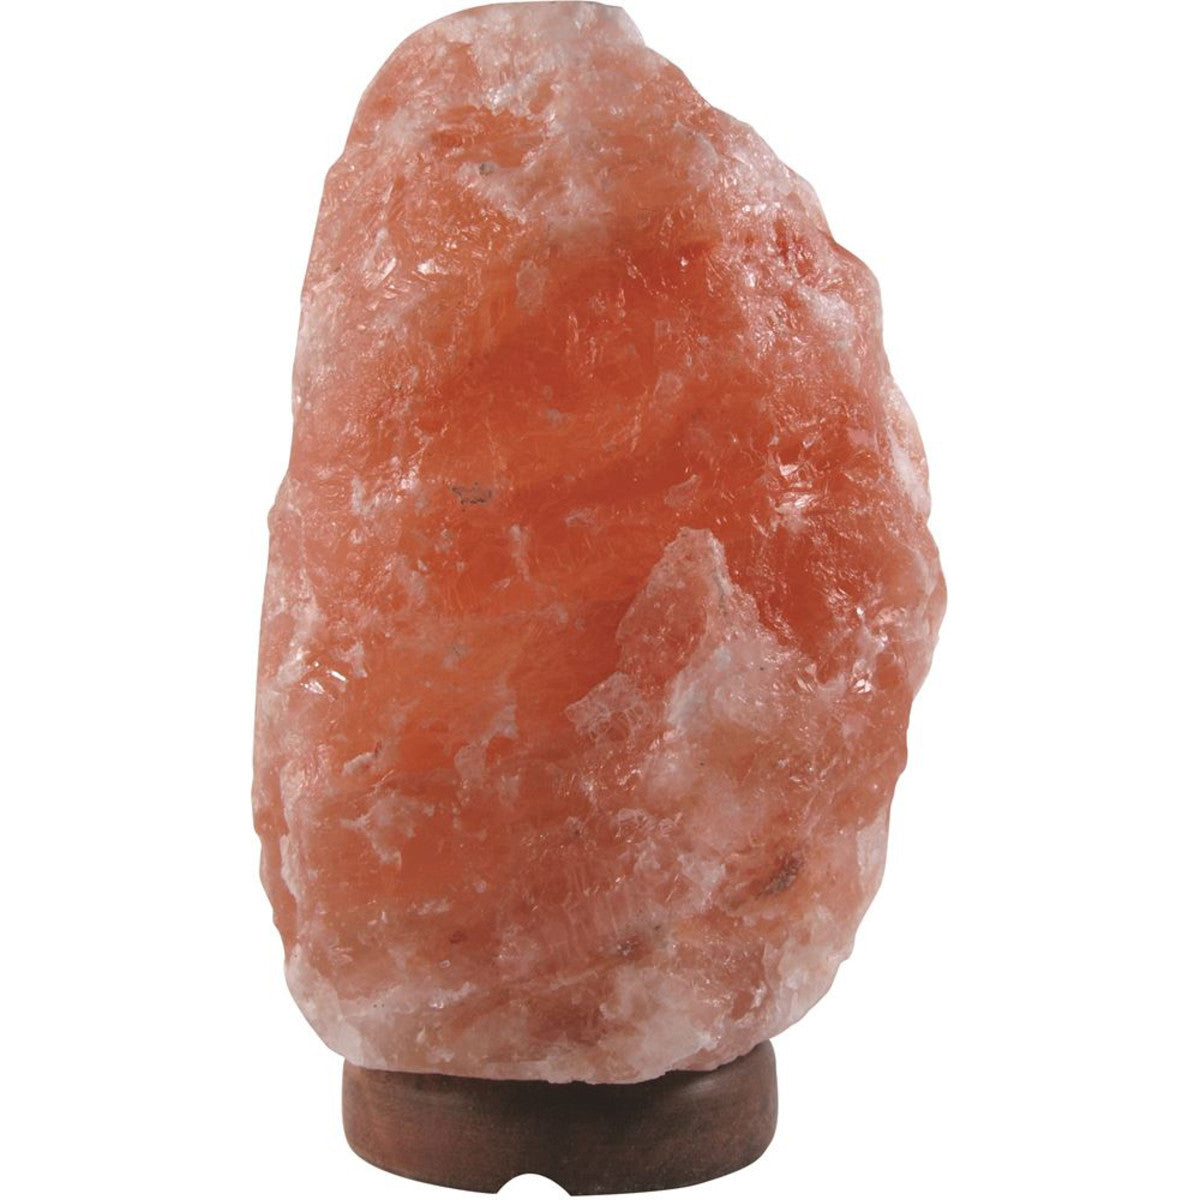 SaltCo Salt Crystal Lamp Extra Small 2 to 3kg